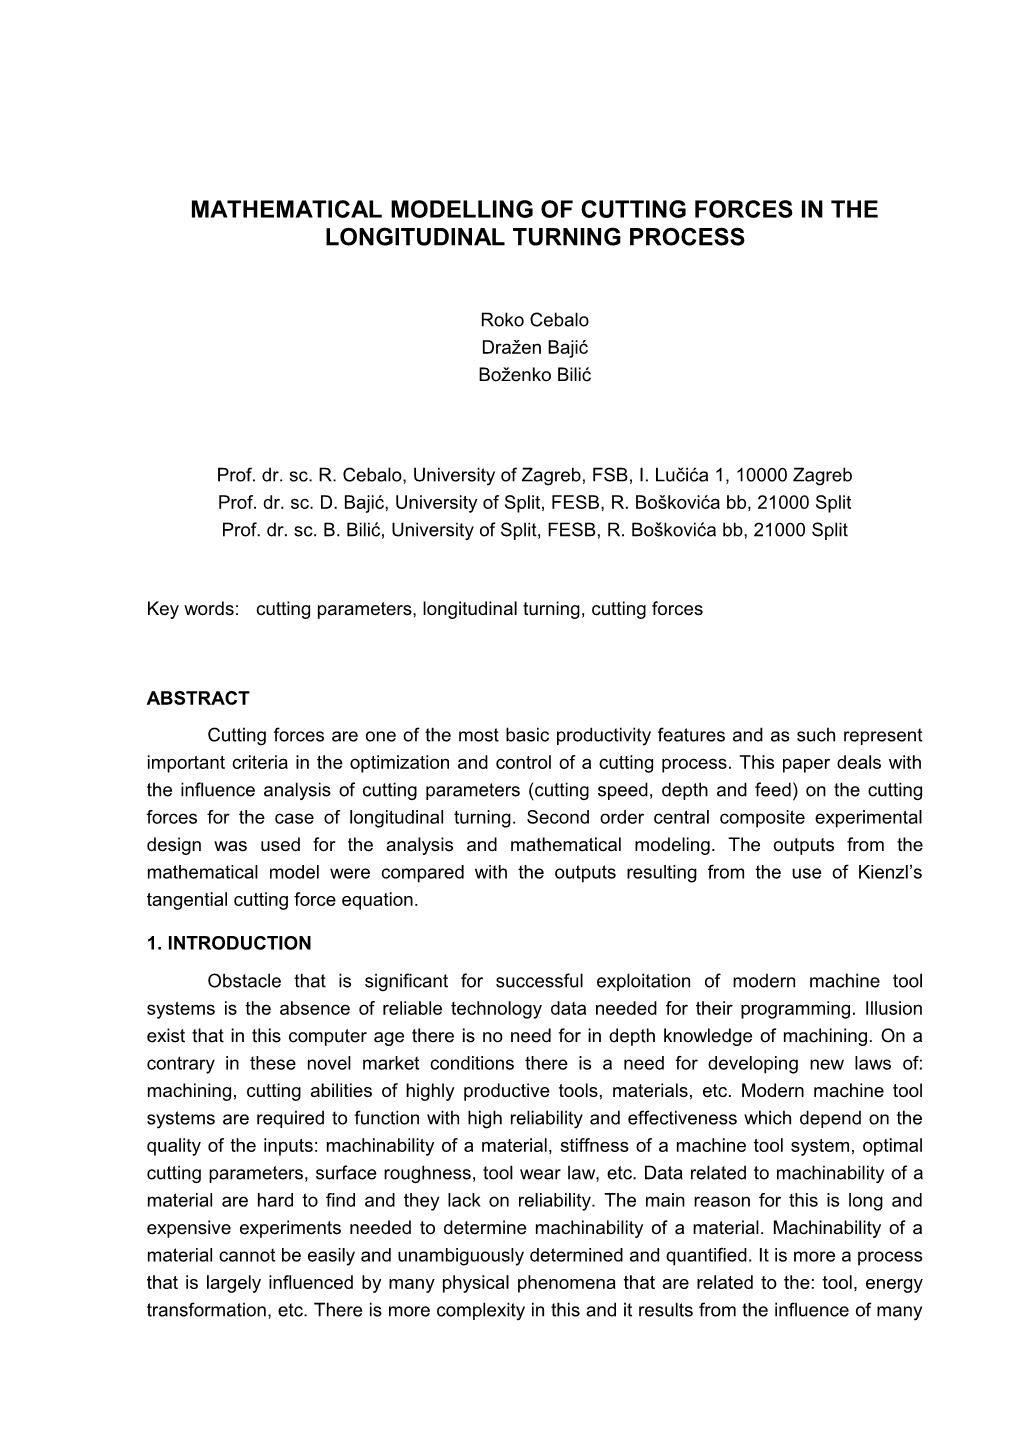 Mathematical Modelling of Cutting Forces in the Longitudinal Turning Process